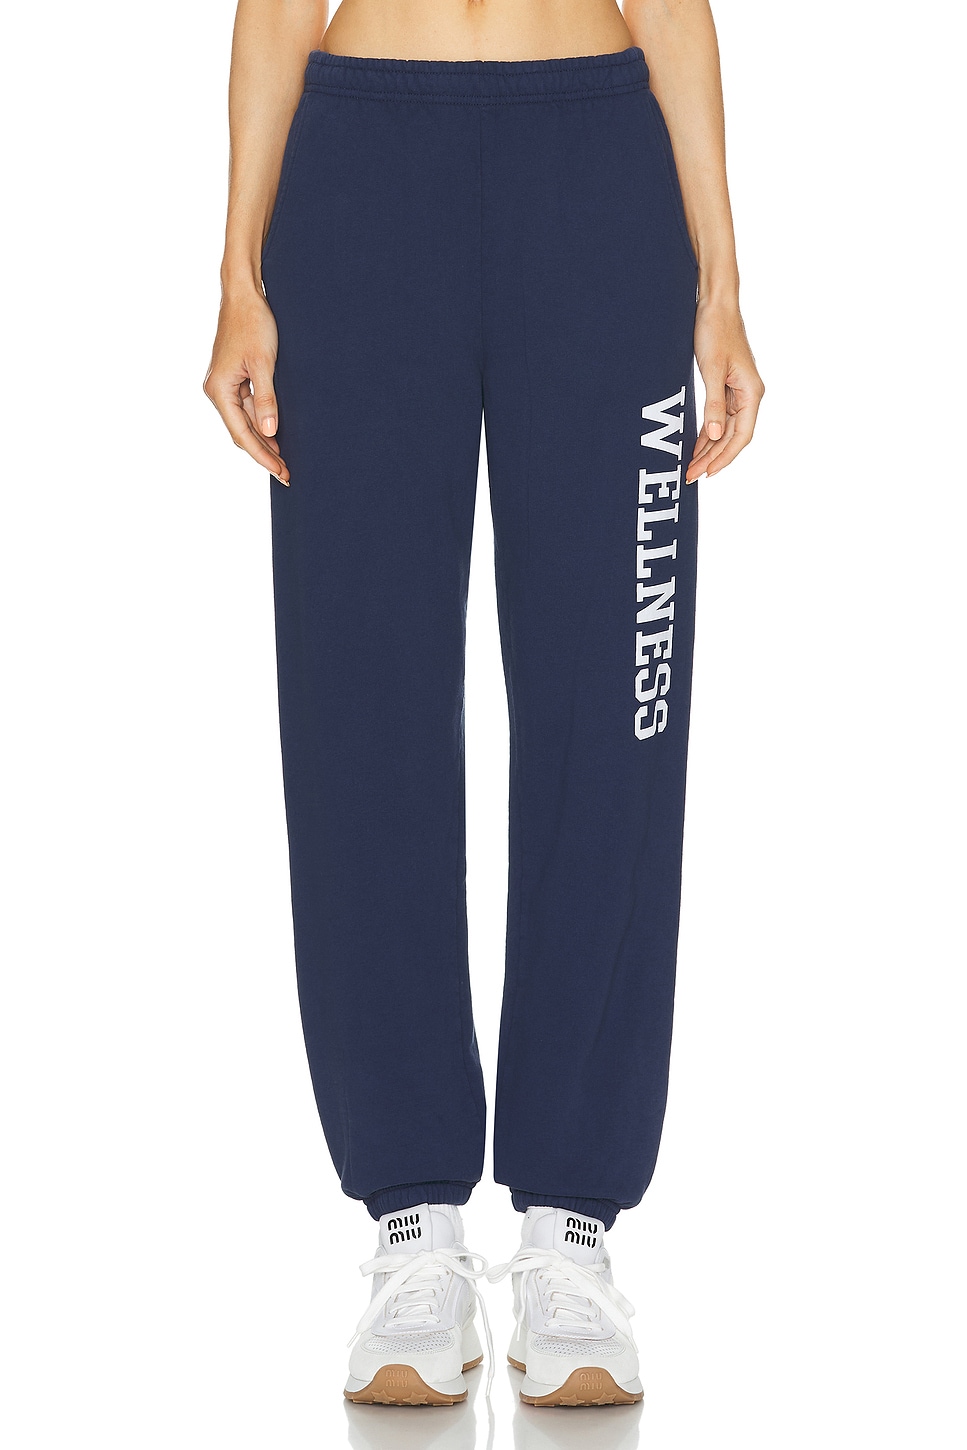 Image 1 of Sporty & Rich Wellness Ivy Sweatpant in Navy & White